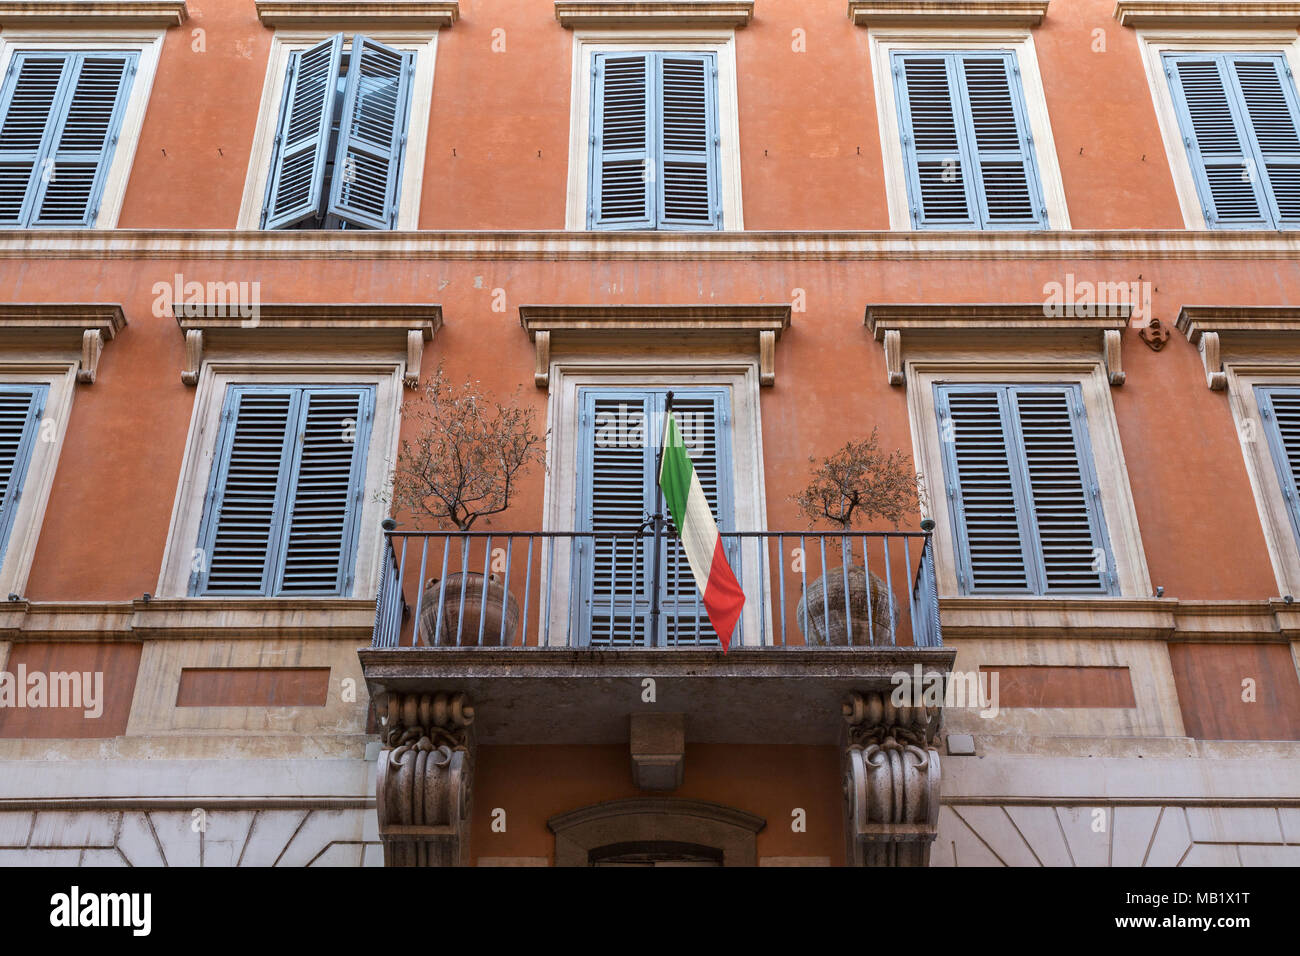 Looking up at a balcony displaying the Italian flag on a building in Rome, Italy. Stock Photo